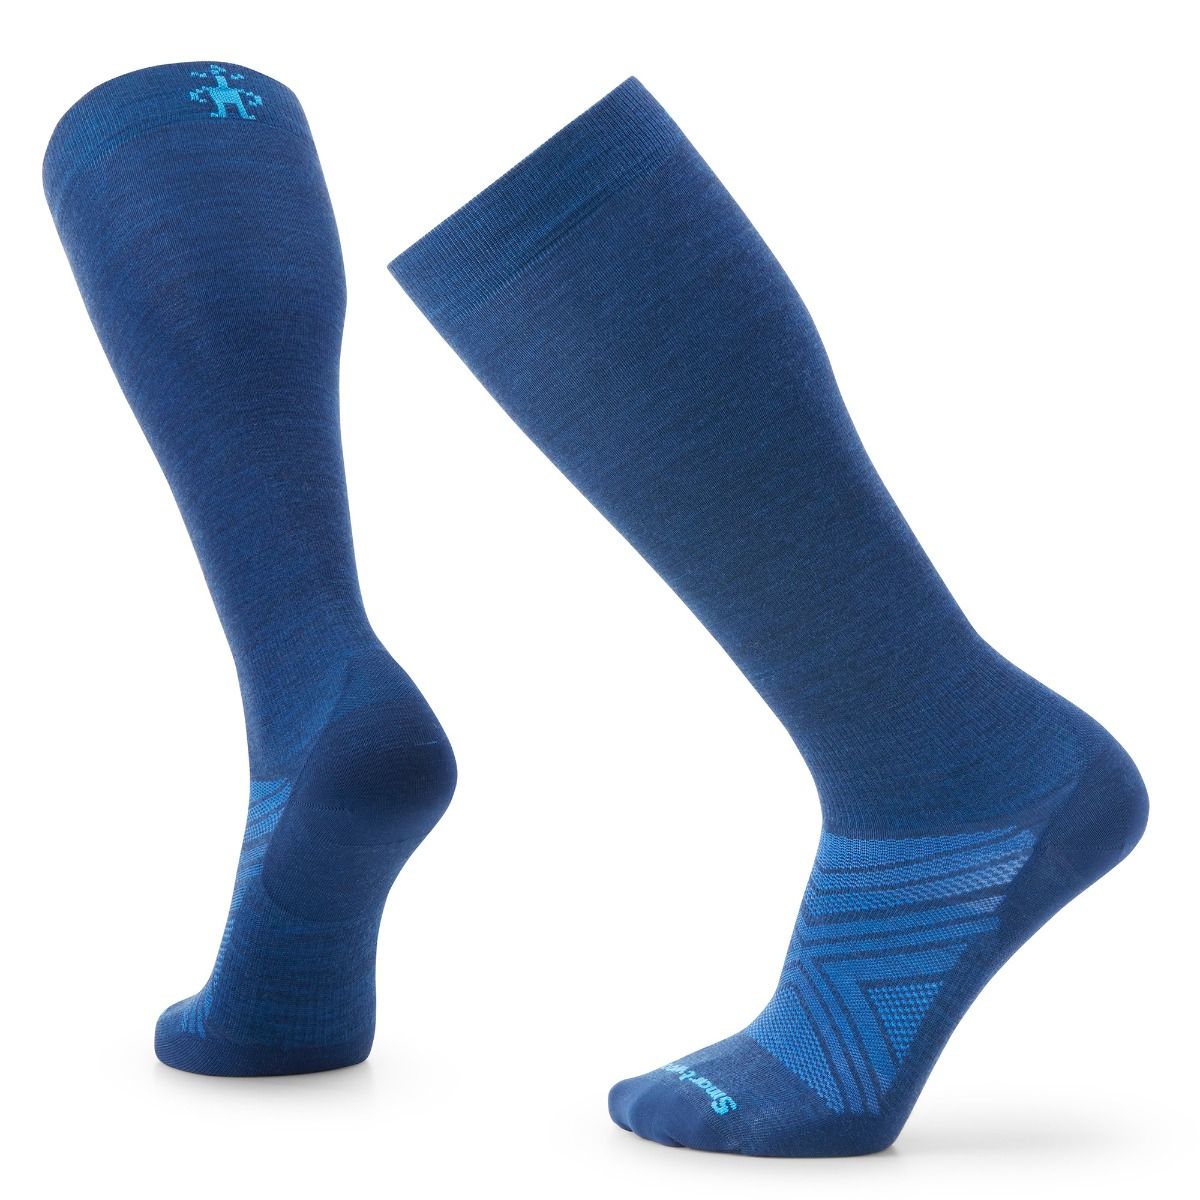 Gildan - Check out our new line, Gildan underwear and socks with Cool-Spire  for cool, dry comfort, at Target!